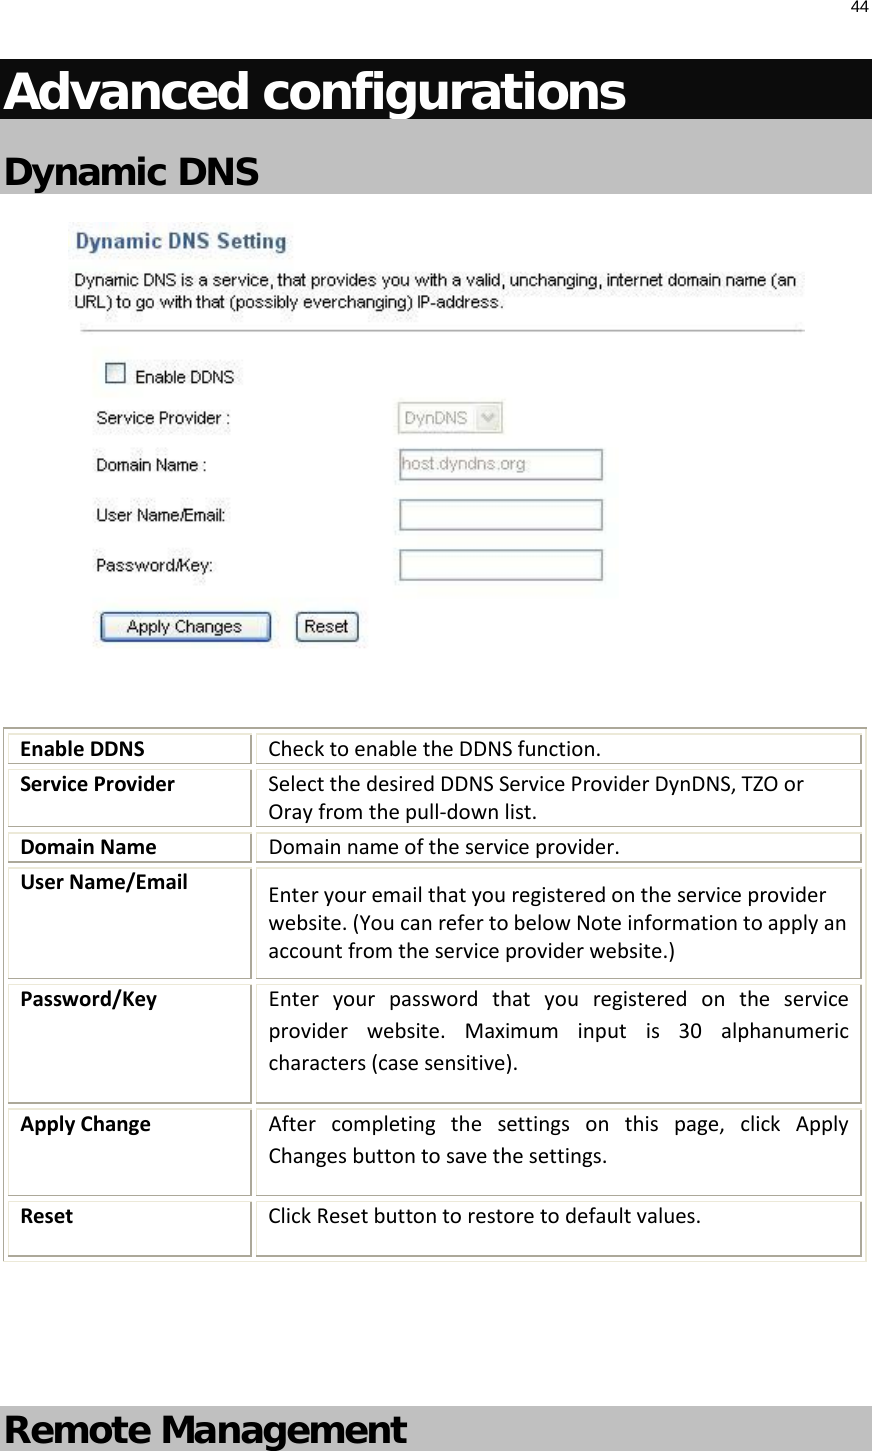 44  Advanced configurations Dynamic DNS   Enable DDNS Check to enable the DDNS function. Service Provider Select the desired DDNS Service Provider DynDNS, TZO or Oray from the pull-down list.  Domain Name Domain name of the service provider. User Name/Email Enter your email that you registered on the service provider website. (You can refer to below Note information to apply an account from the service provider website.) Password/Key Enter your password that you registered  on the service provider website.  Maximum input is 30  alphanumeric characters (case sensitive). Apply Change After completing the settings on this page, click Apply Changes button to save the settings. Reset Click Reset button to restore to default values.   Remote Management  